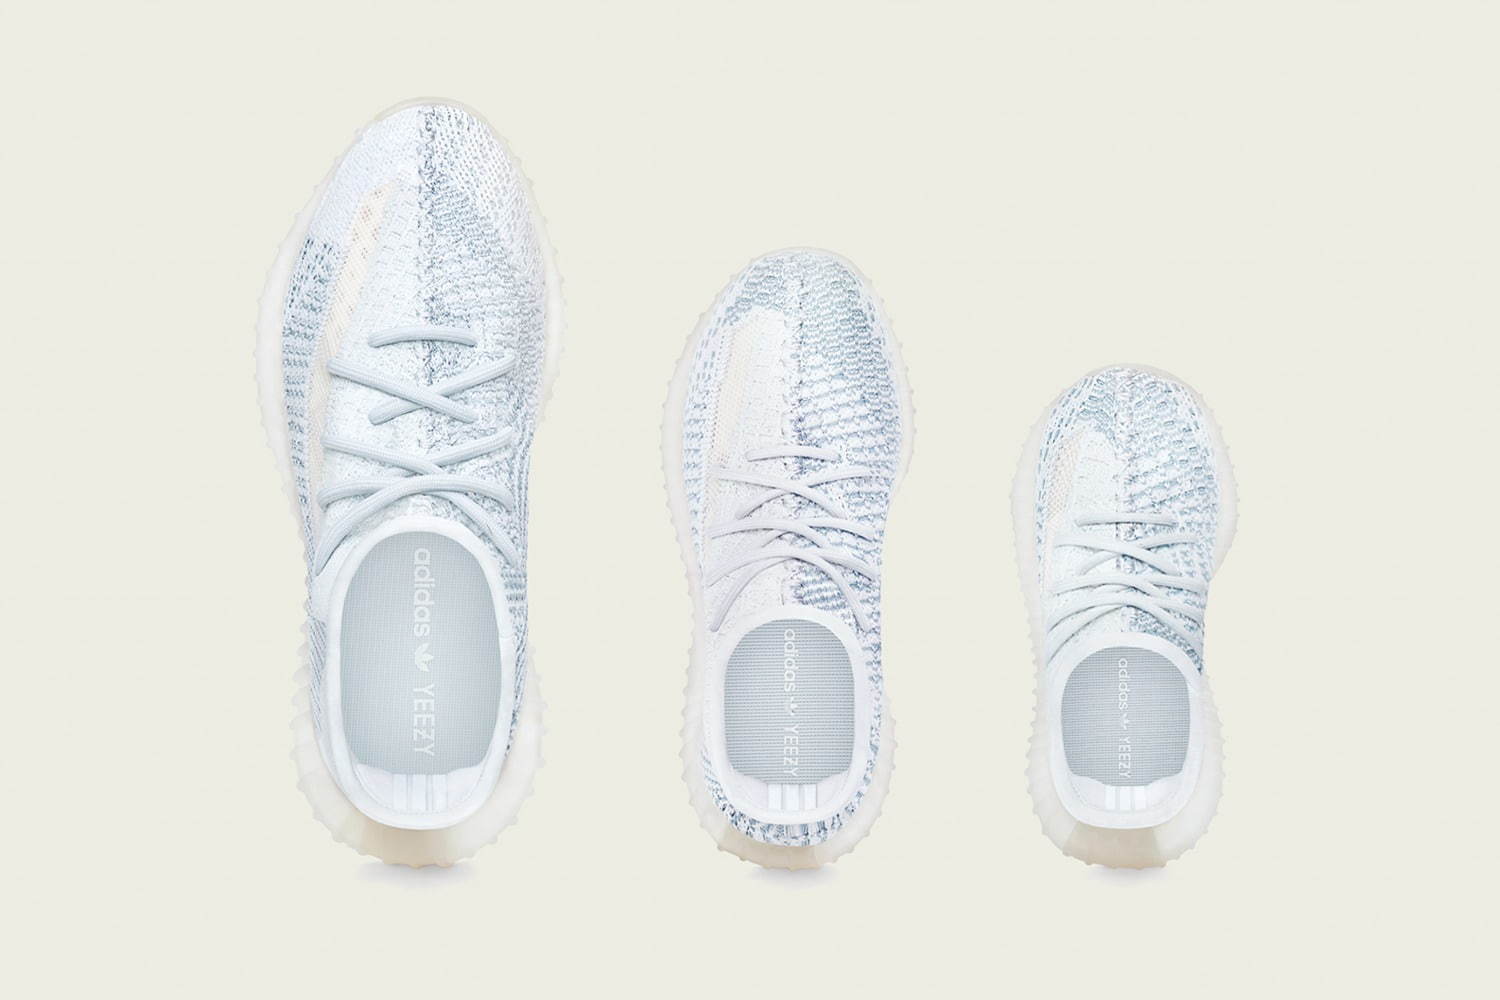 yeezy boost white cloud